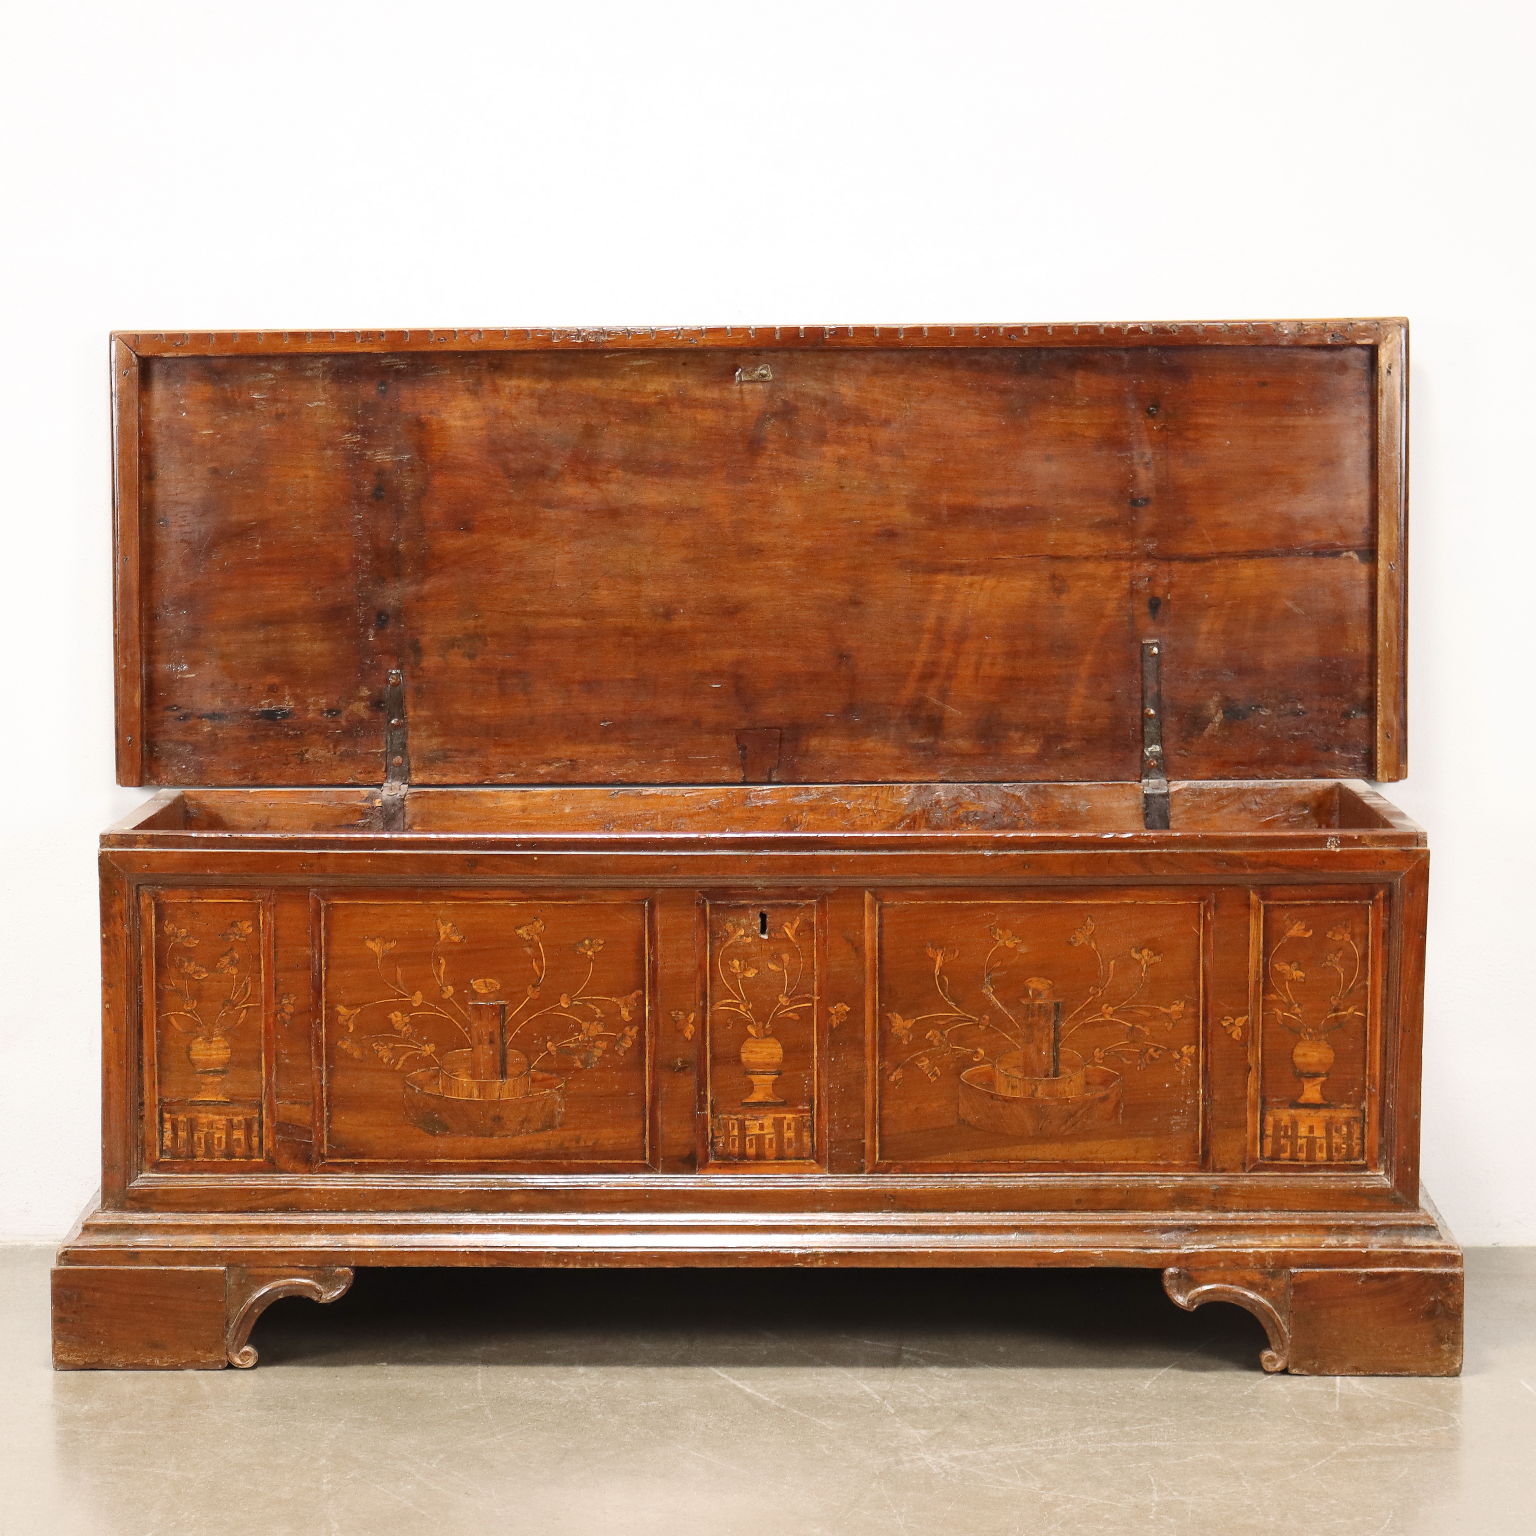 Antique Neoclassical Chest Maple with Decorations Italy XVIII Century